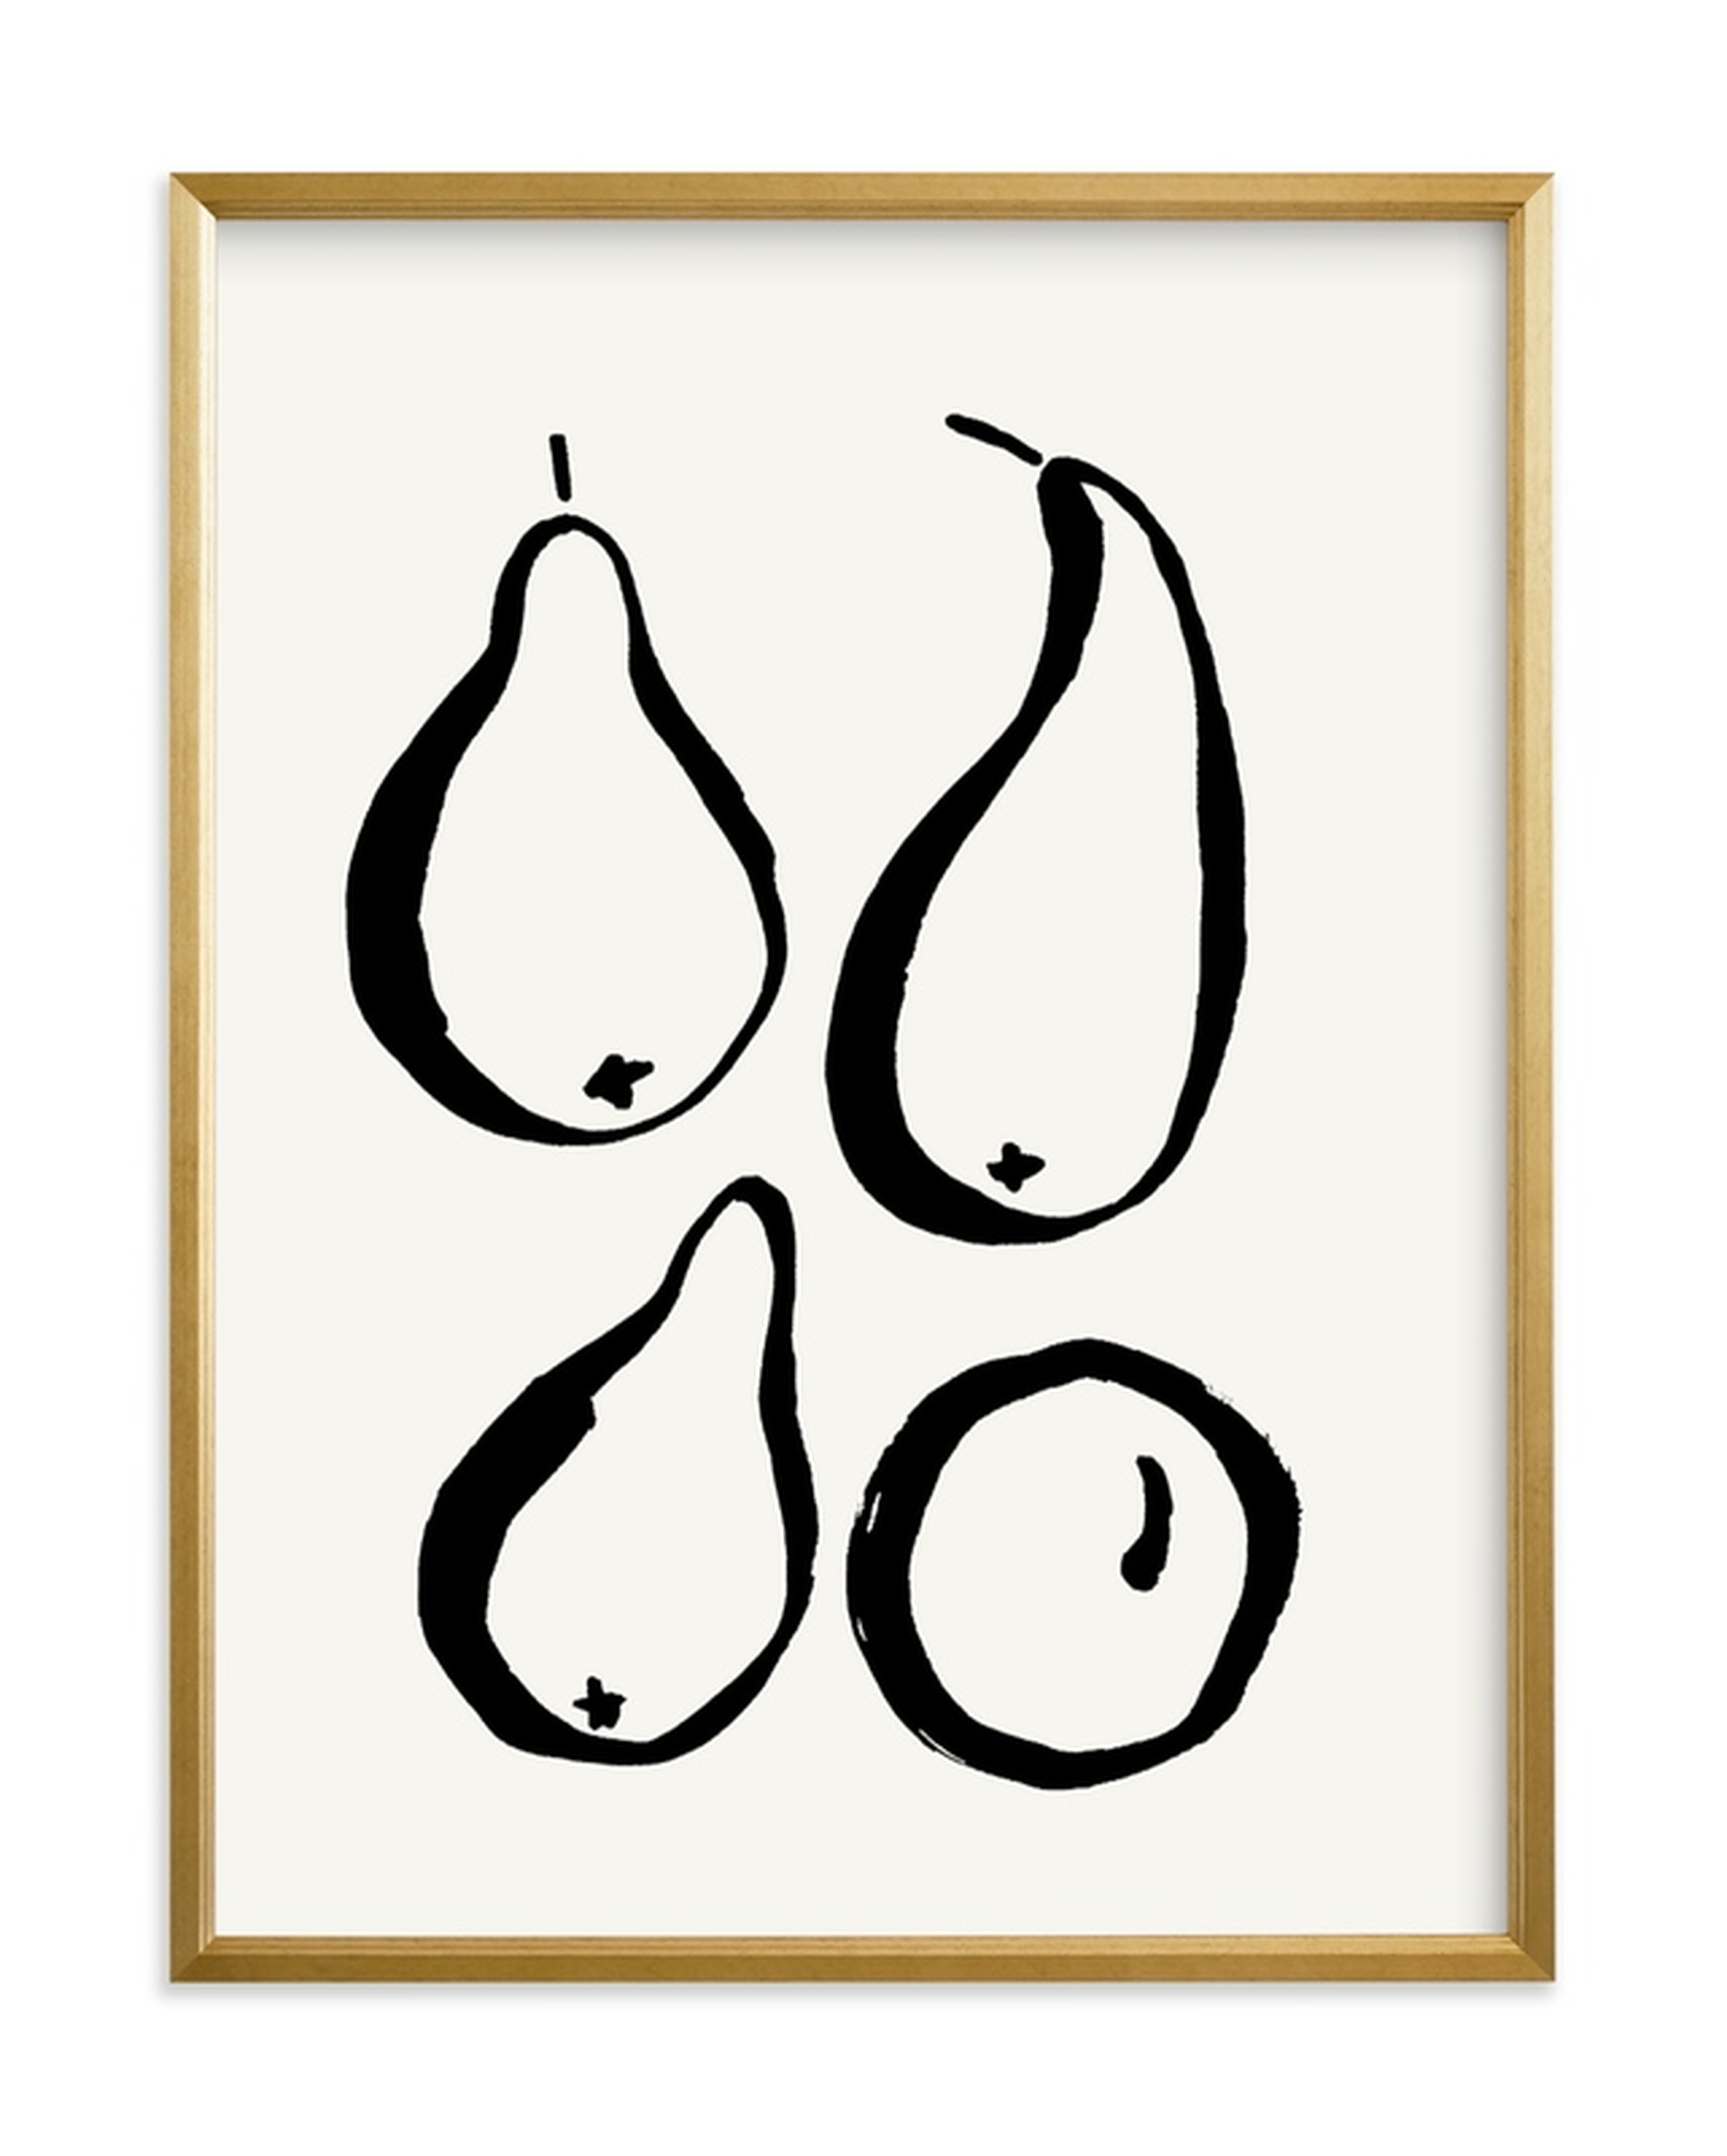 Still-life With Four Pears Art Print - Minted